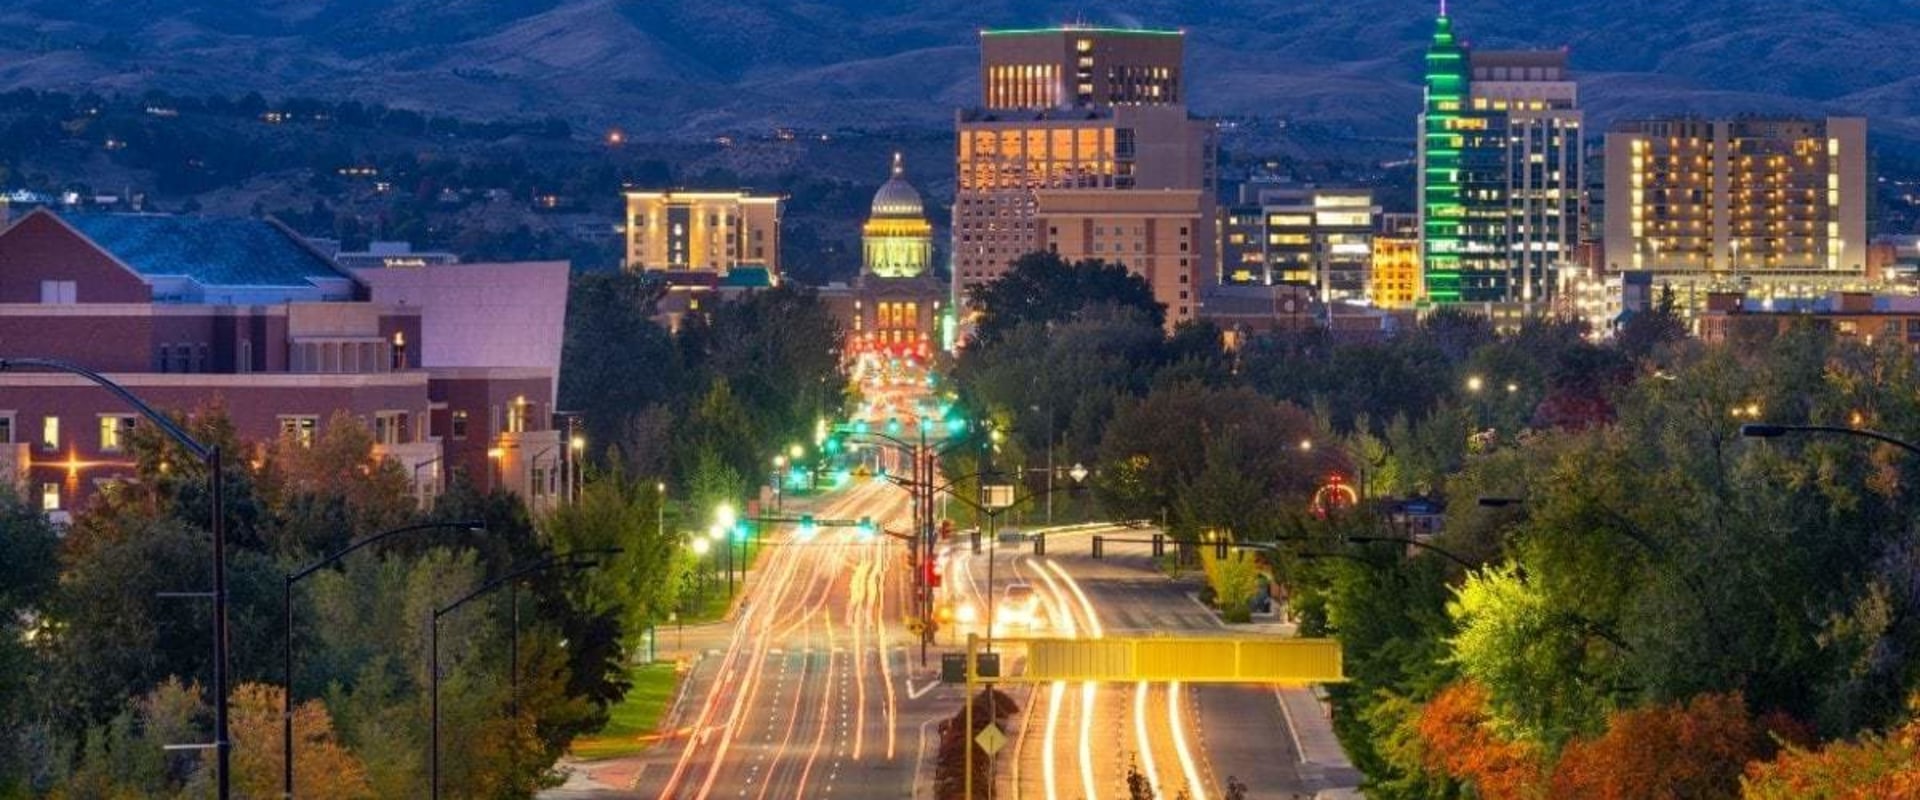 What is boise best known for?